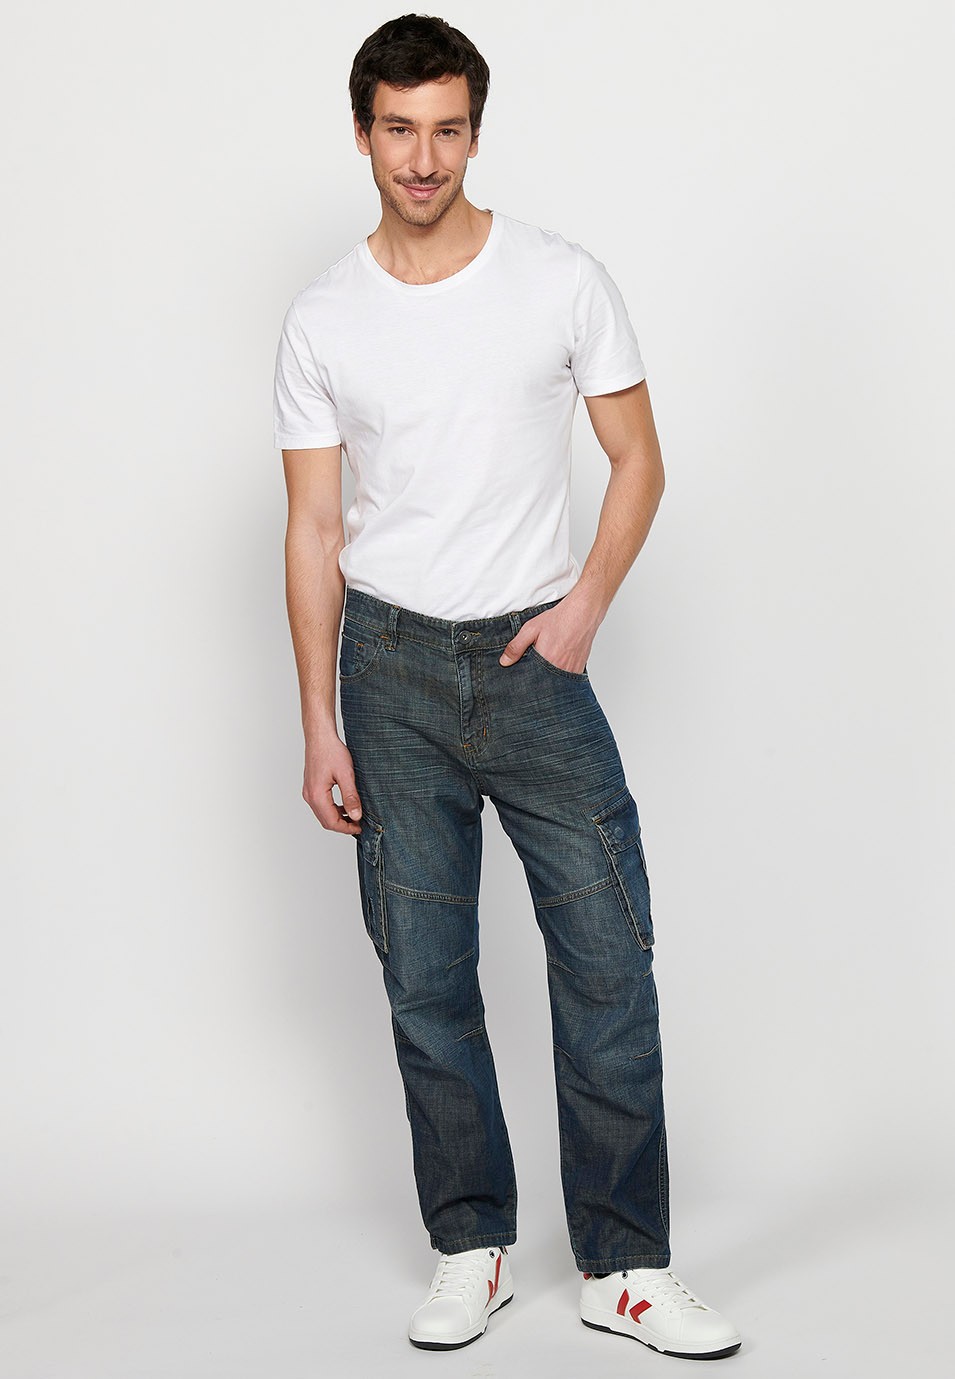 Long Cargo Pants with Front Zipper and Button Closure with Side Flap Pockets in Dark Blue for Men